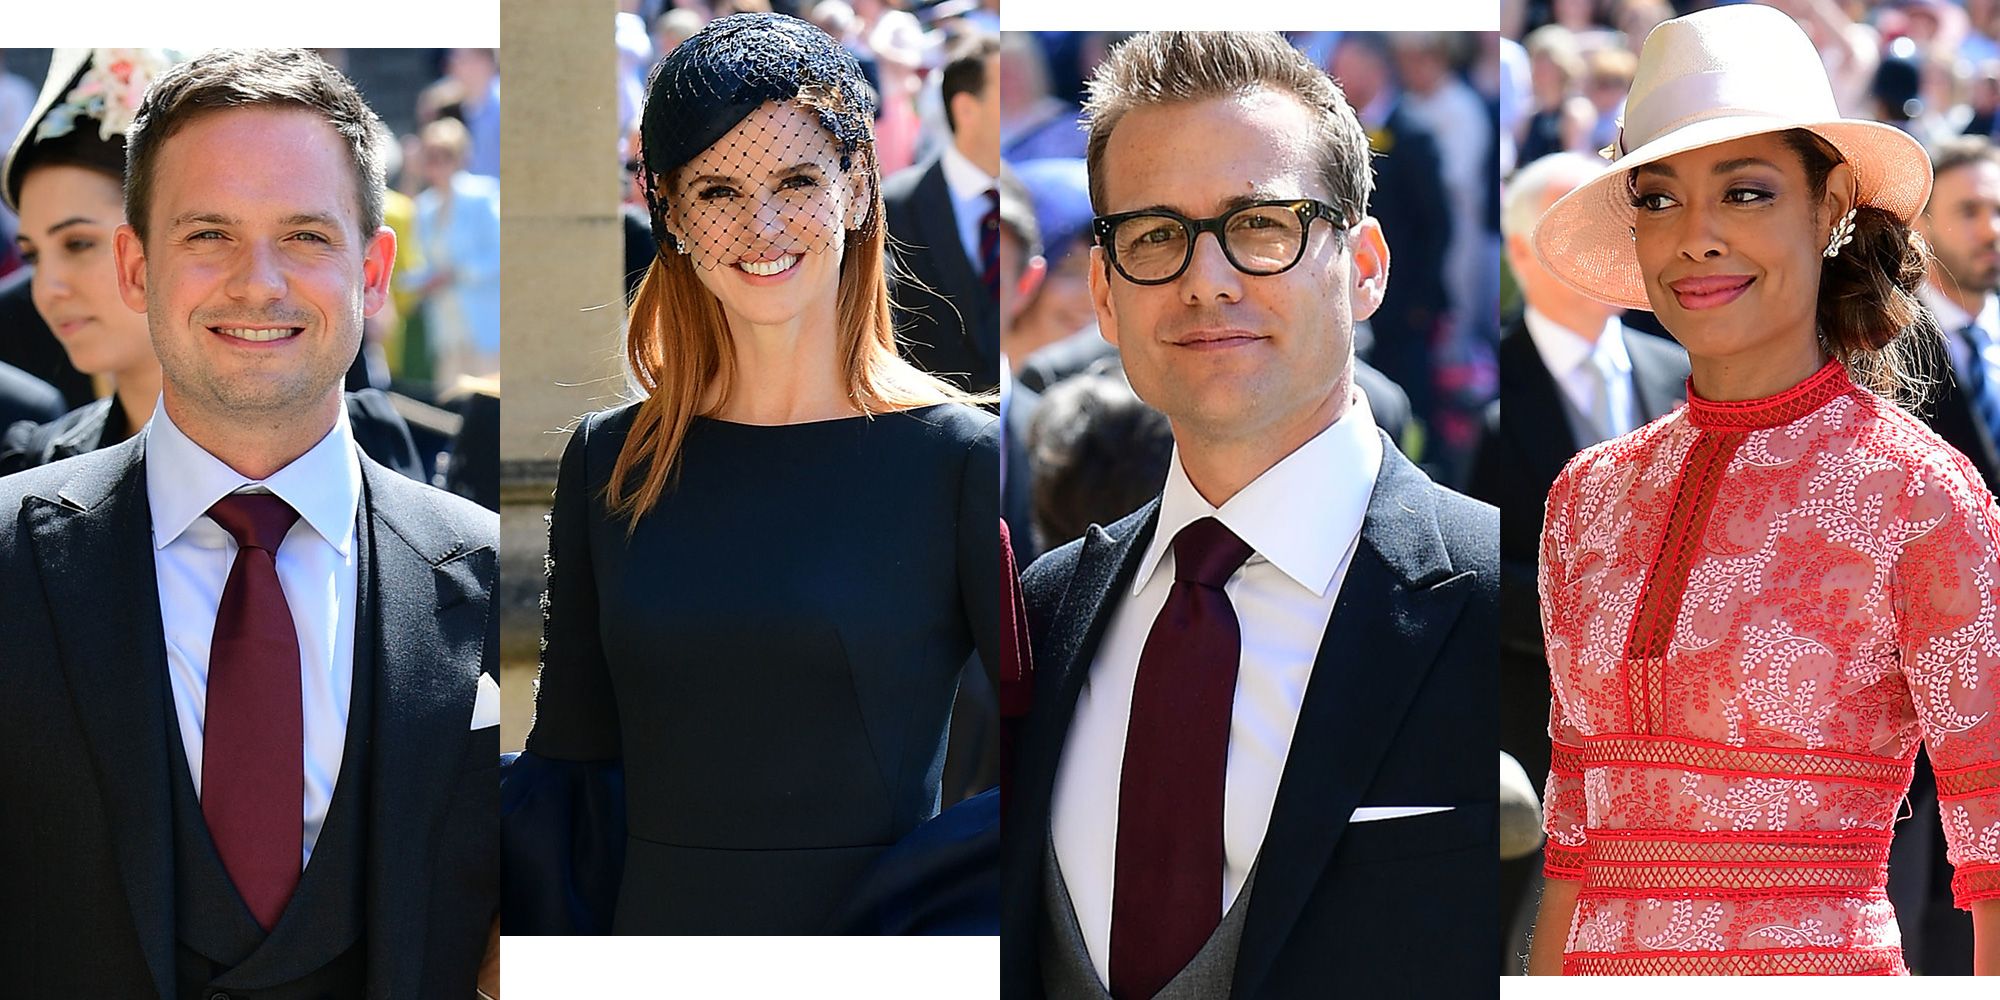 Suits cast at royal wedding